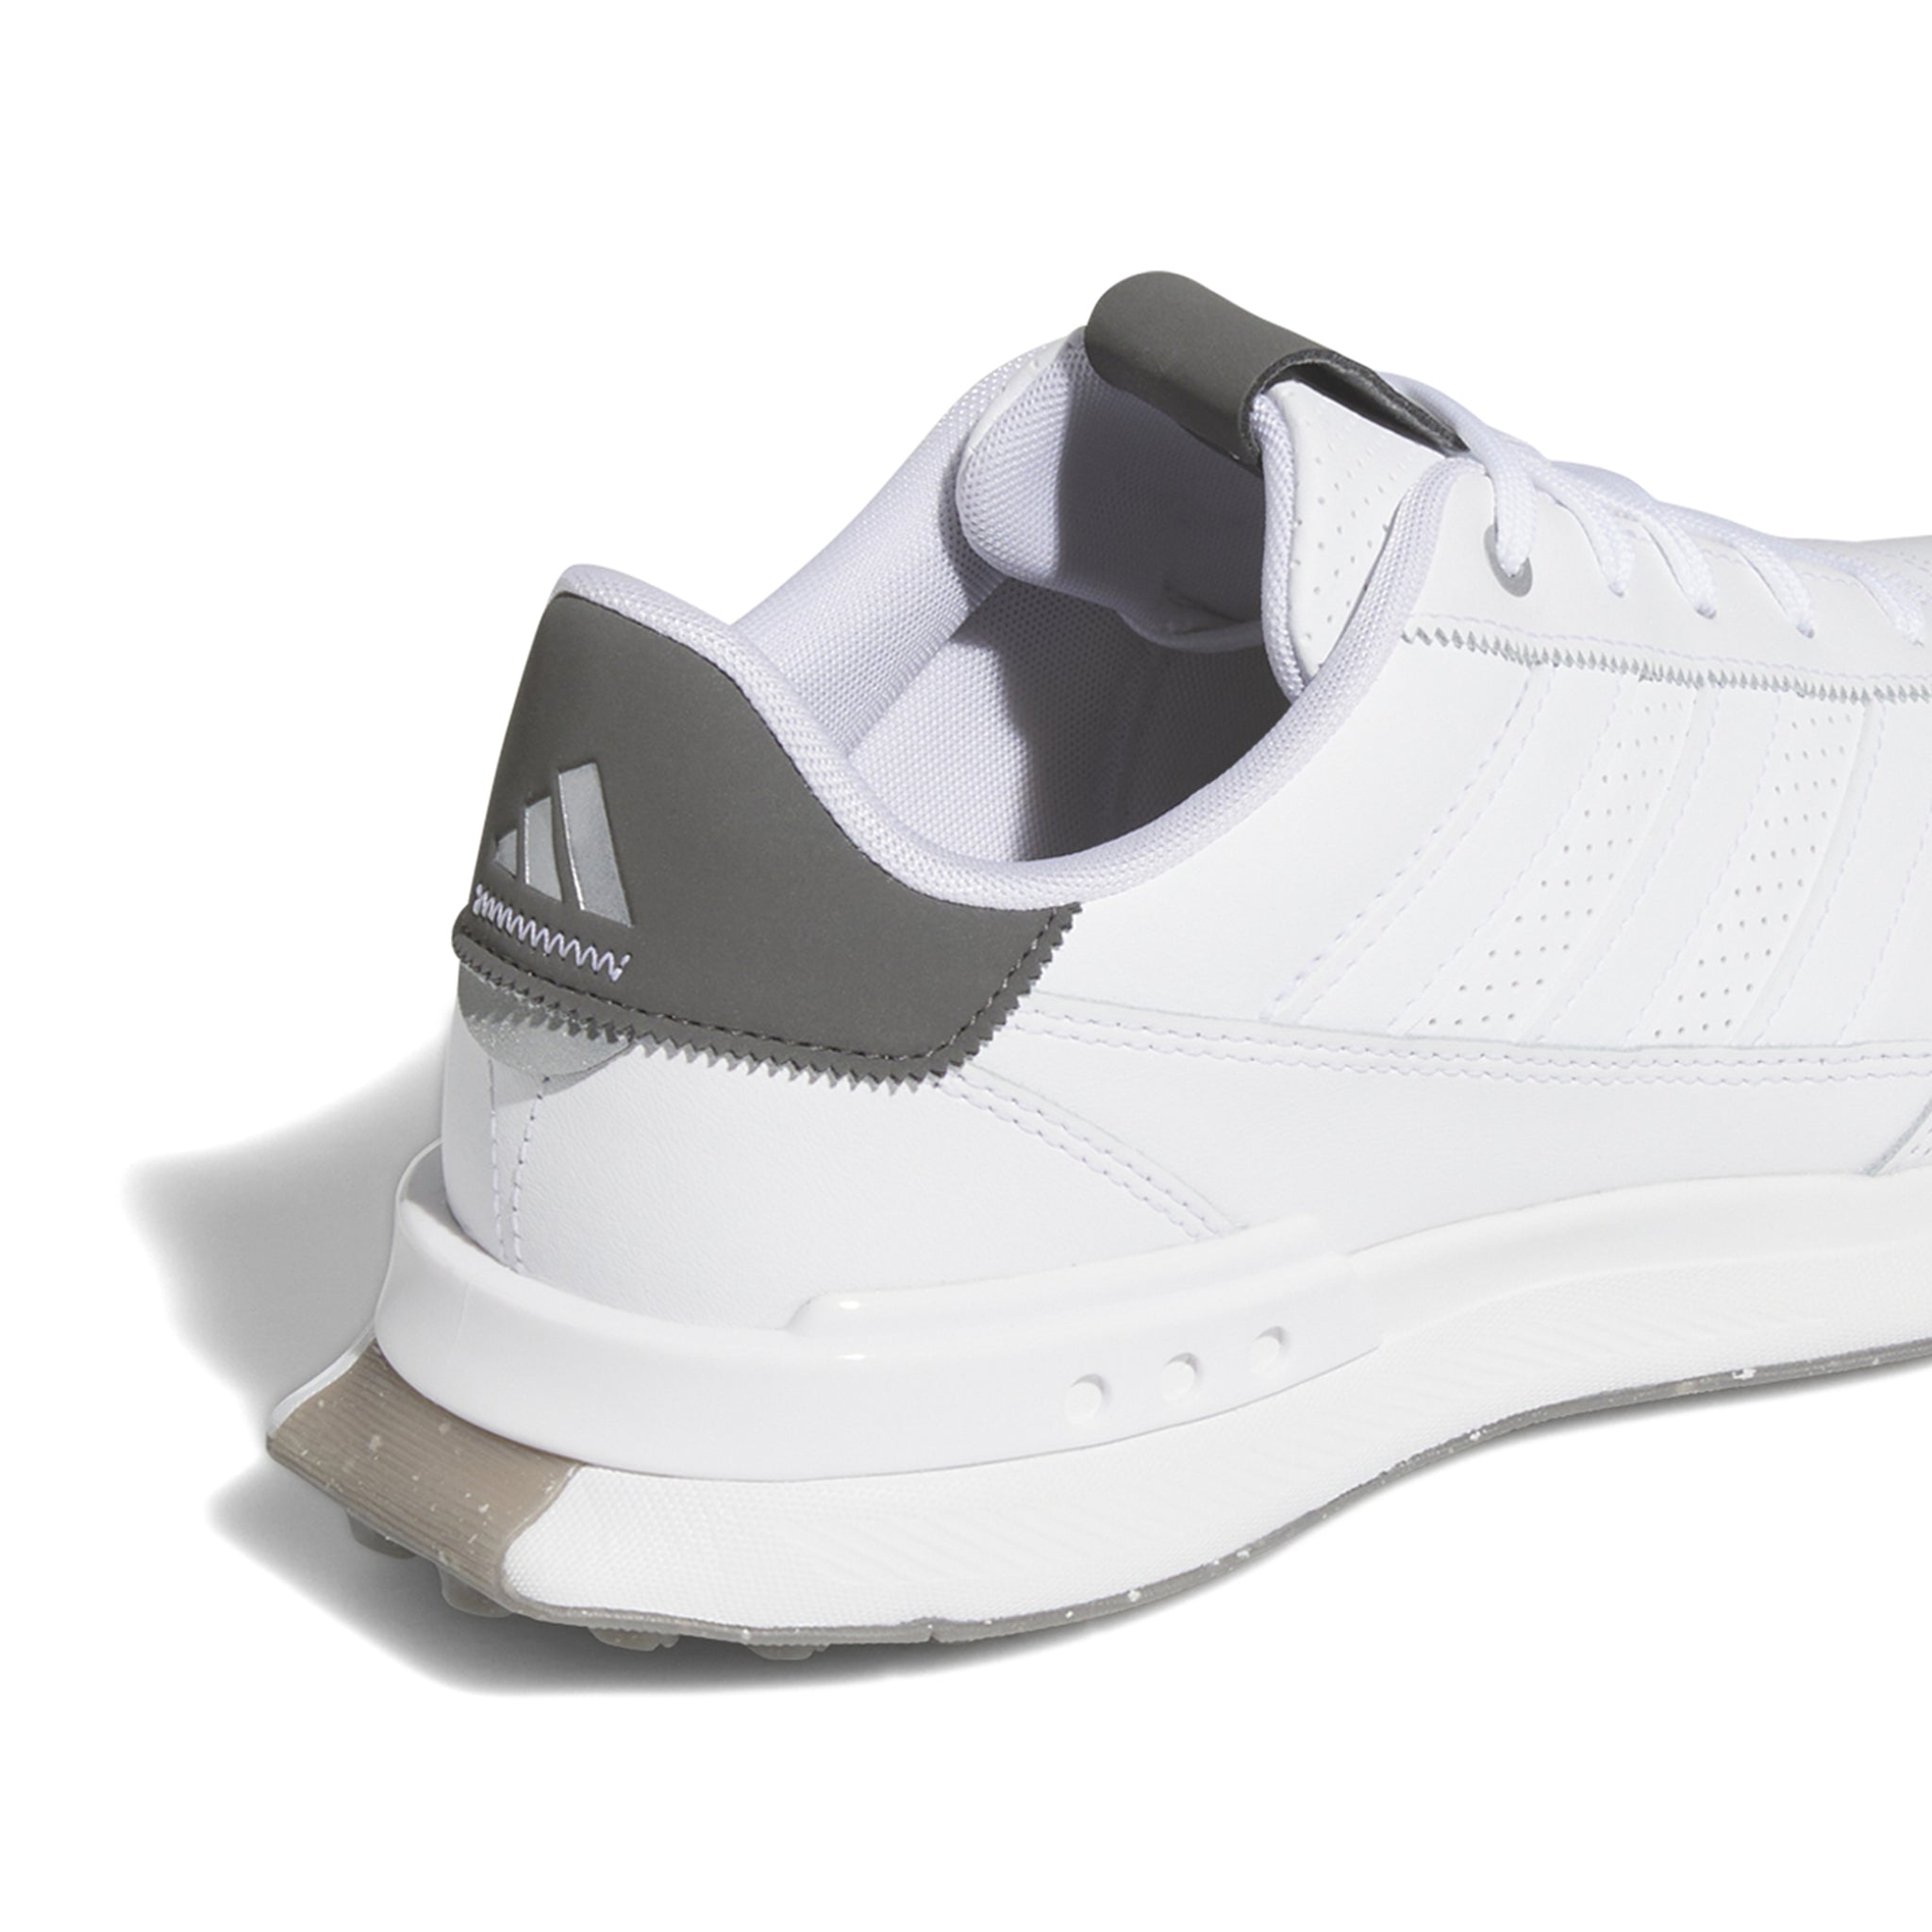 adidas-s2g-sl-leather-24-golf-shoes-if0298-white-charcoal